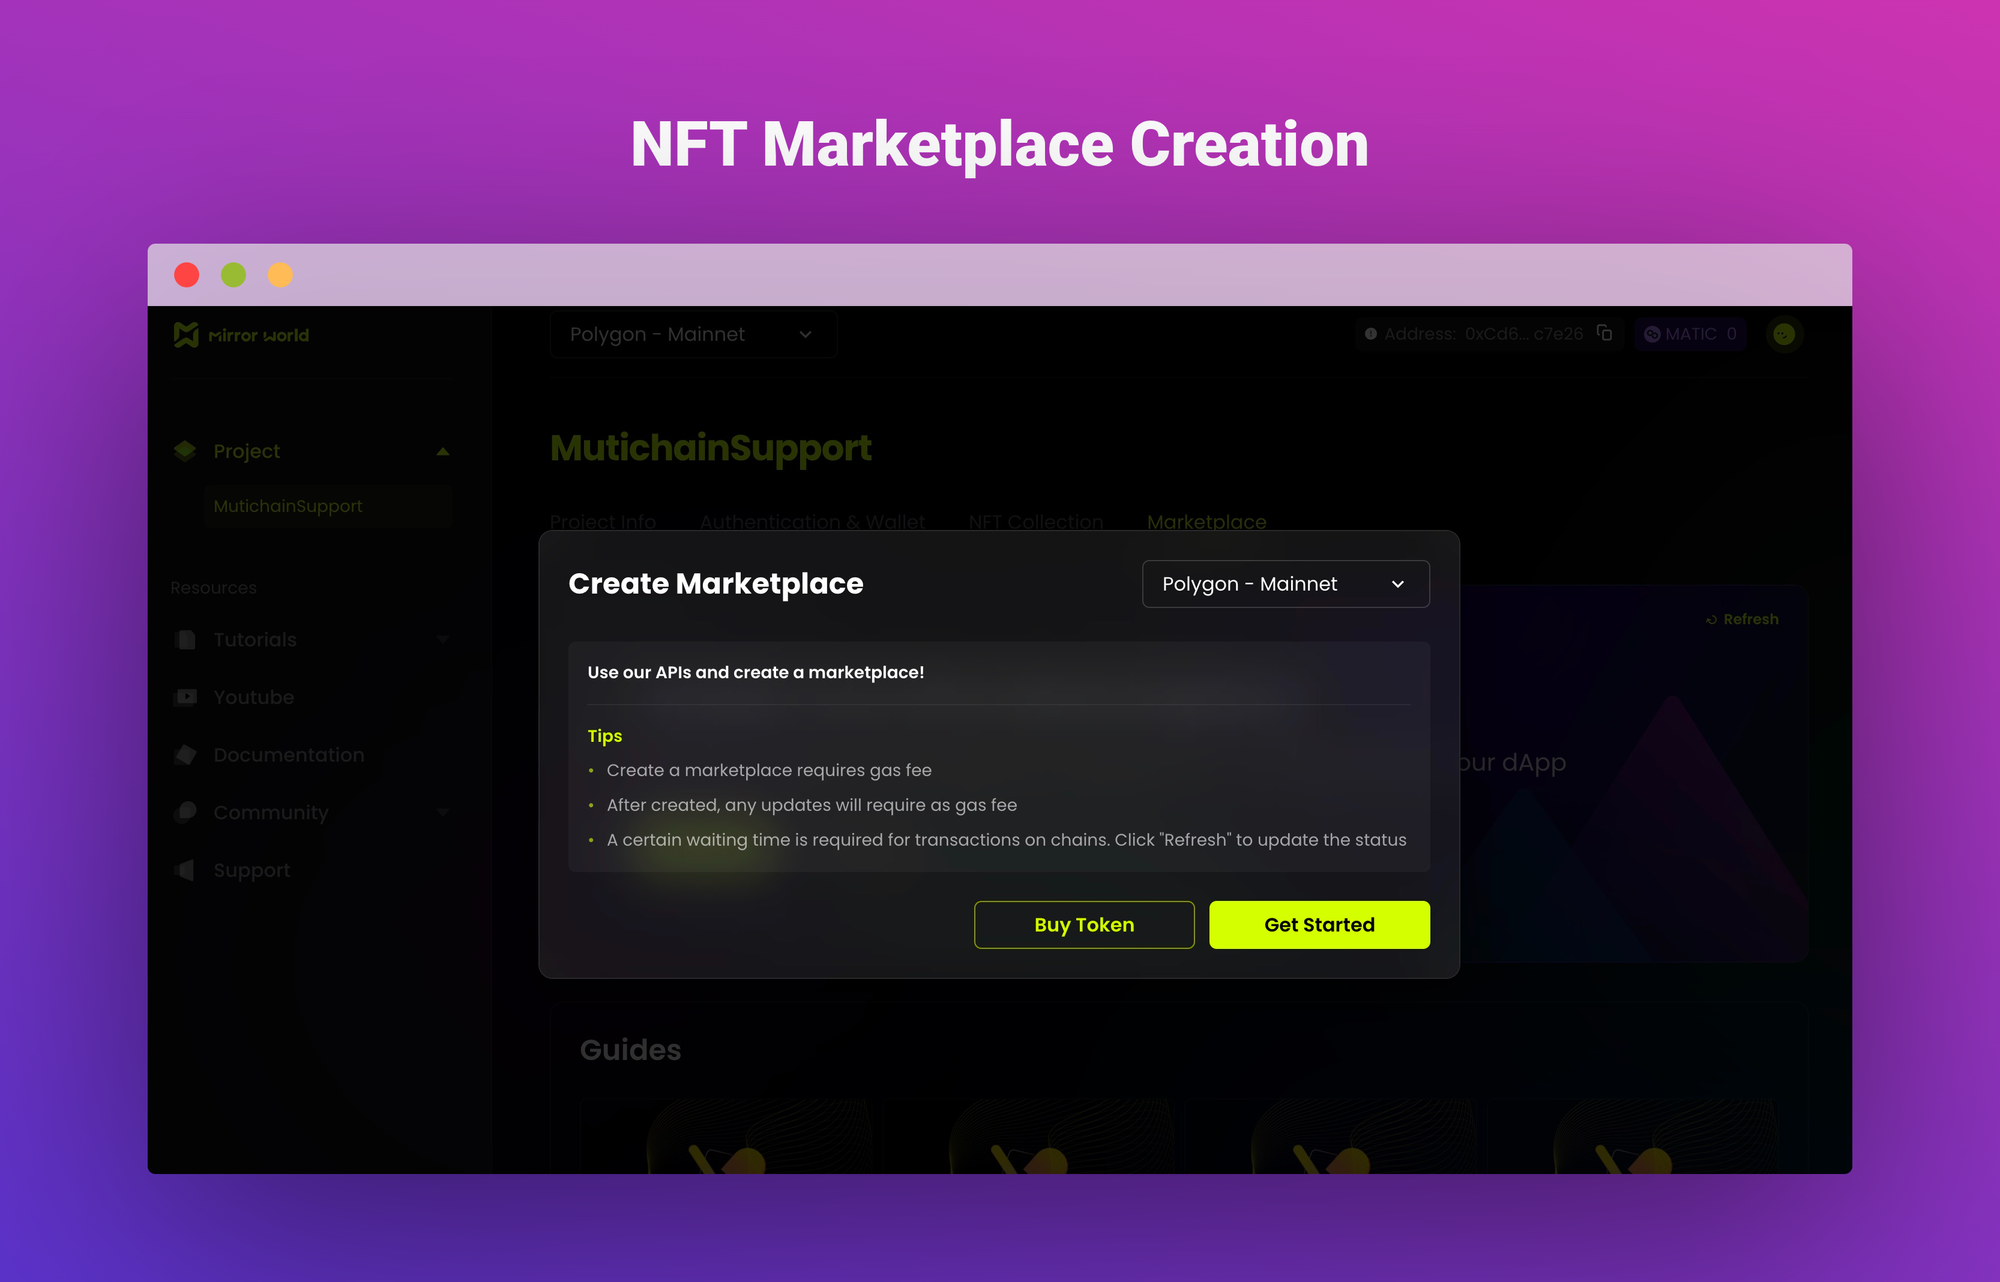 Also supports low-code marketplace creation on dashboard